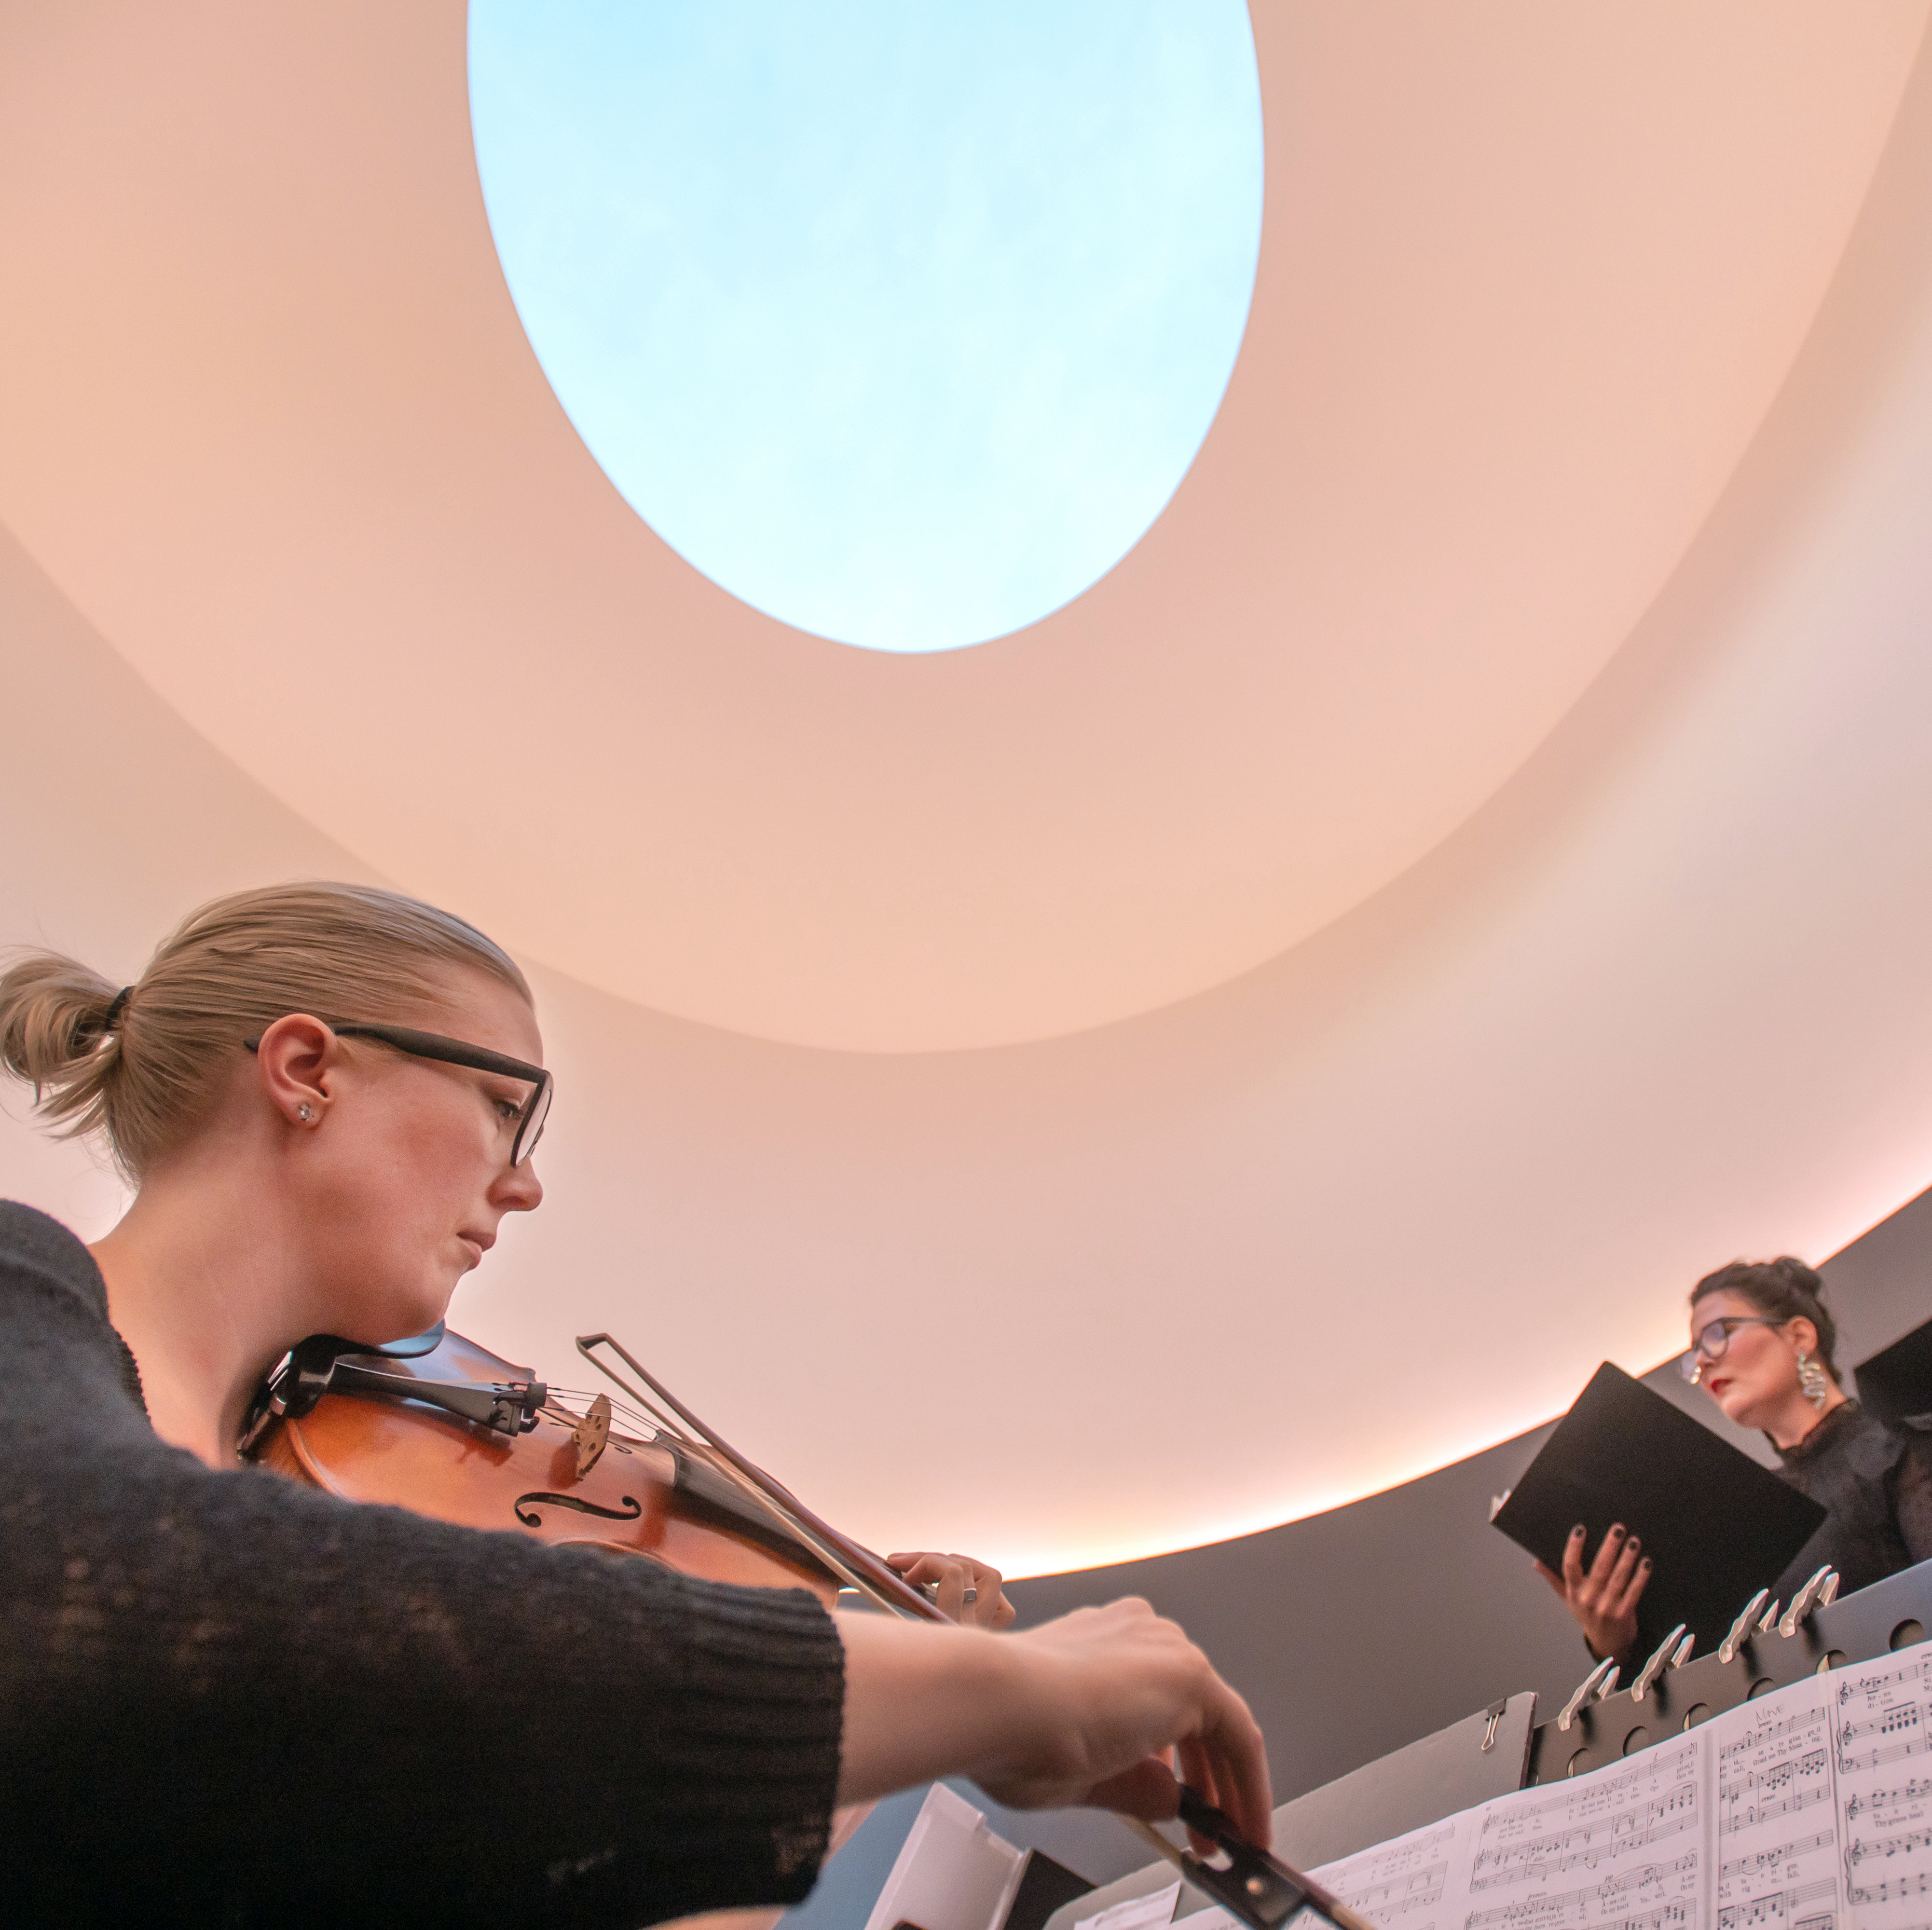 Two musicians perform under the oculus of James Turrell's "The Color Inside"